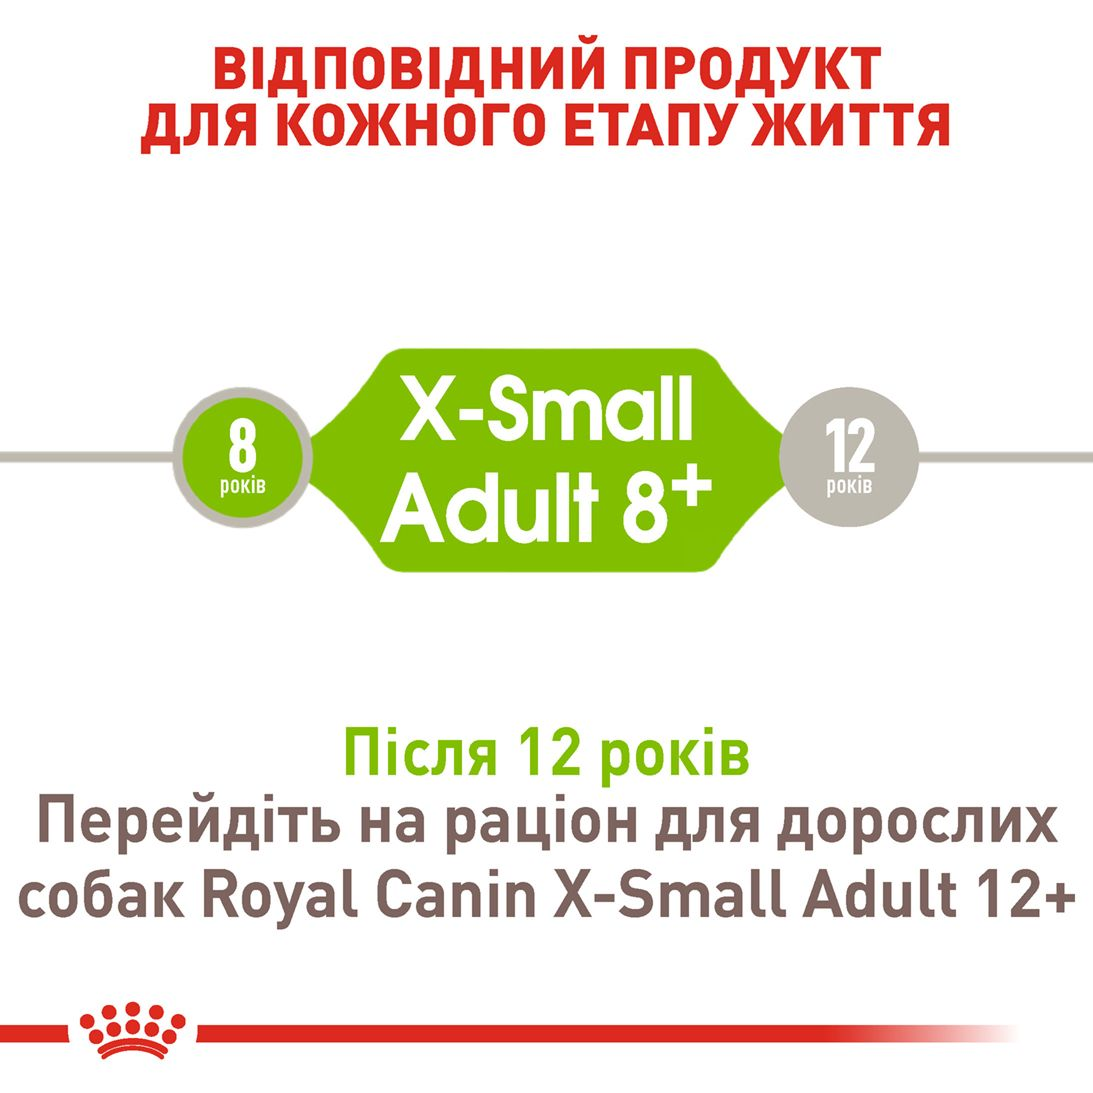 X-Small Adult 8+